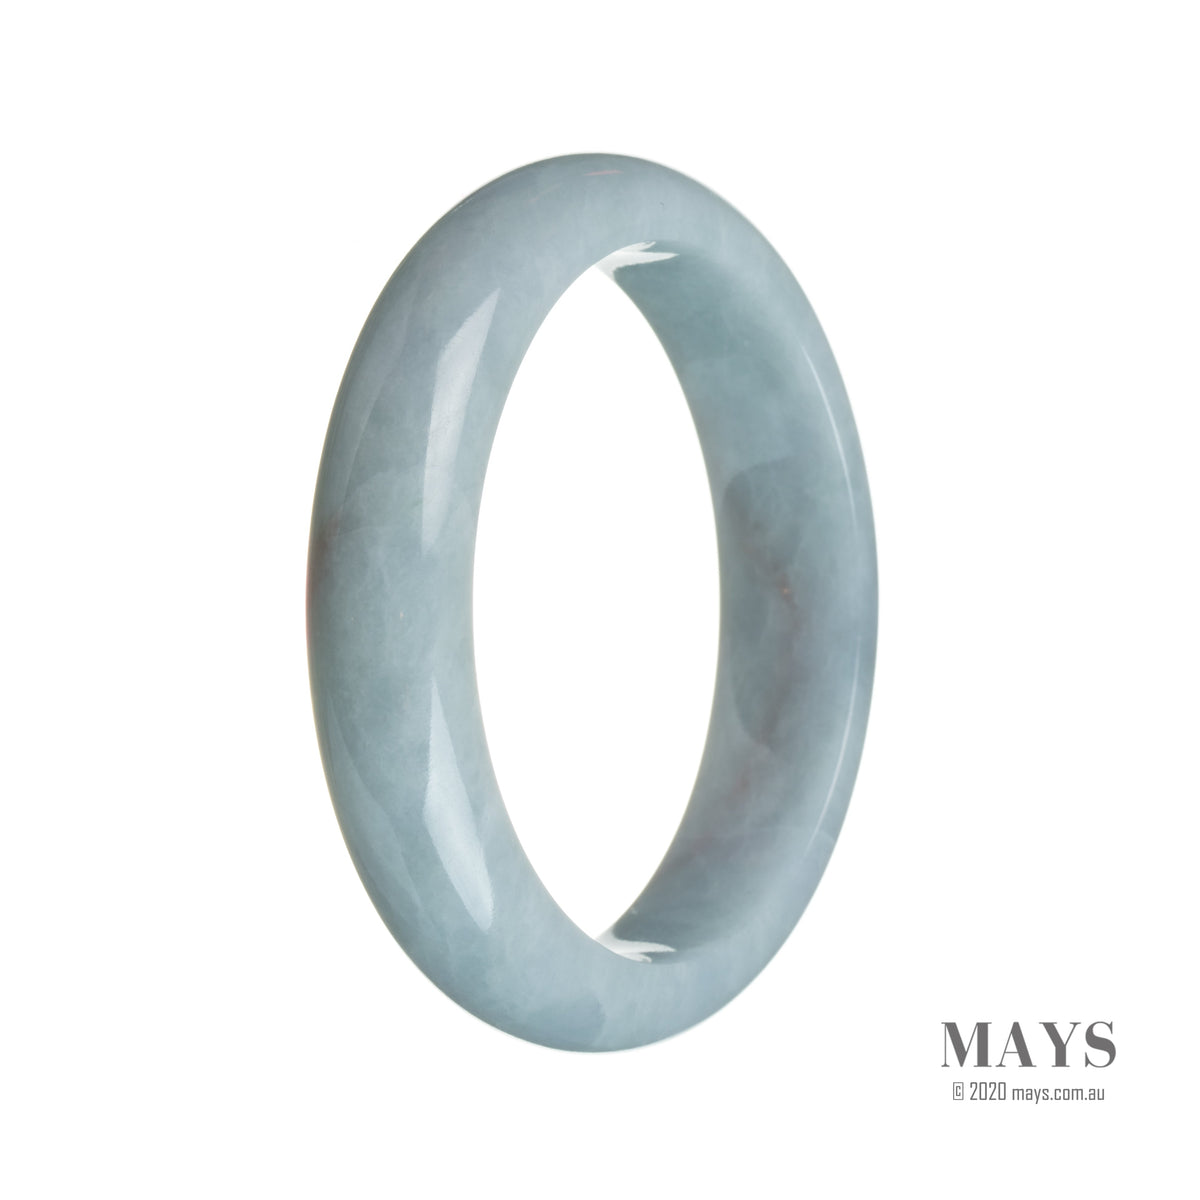 A beautiful bluish lavender jadeite bangle bracelet in a half moon shape, crafted from genuine grade A jadeite. Perfect for adding a touch of elegance to any outfit.